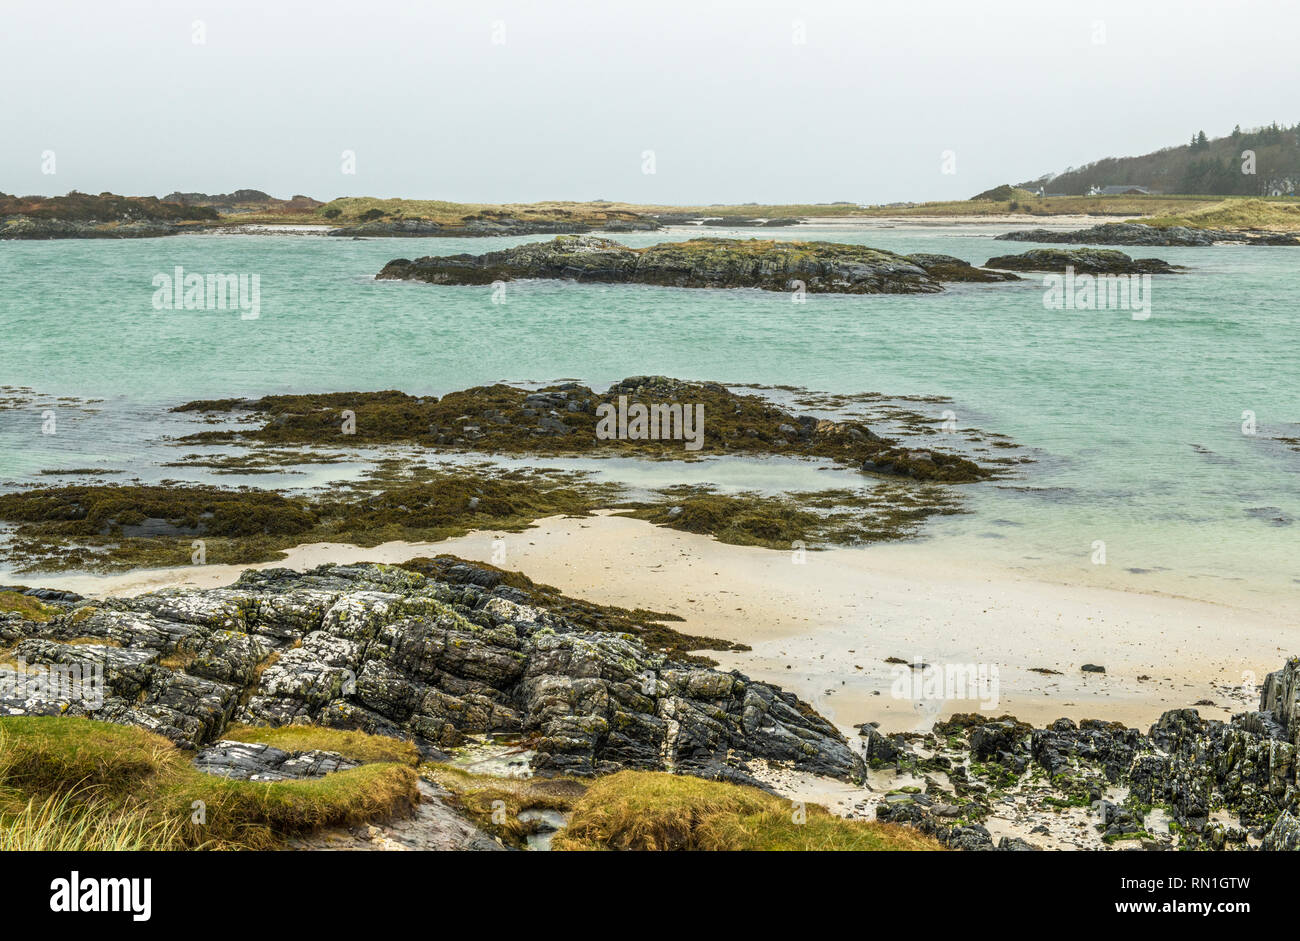 Traigh Beach on the west Scottish Coast near Mallaig, photographed on a dull weather day but still with plenty of detail of the rocks, sand and sea. Stock Photo